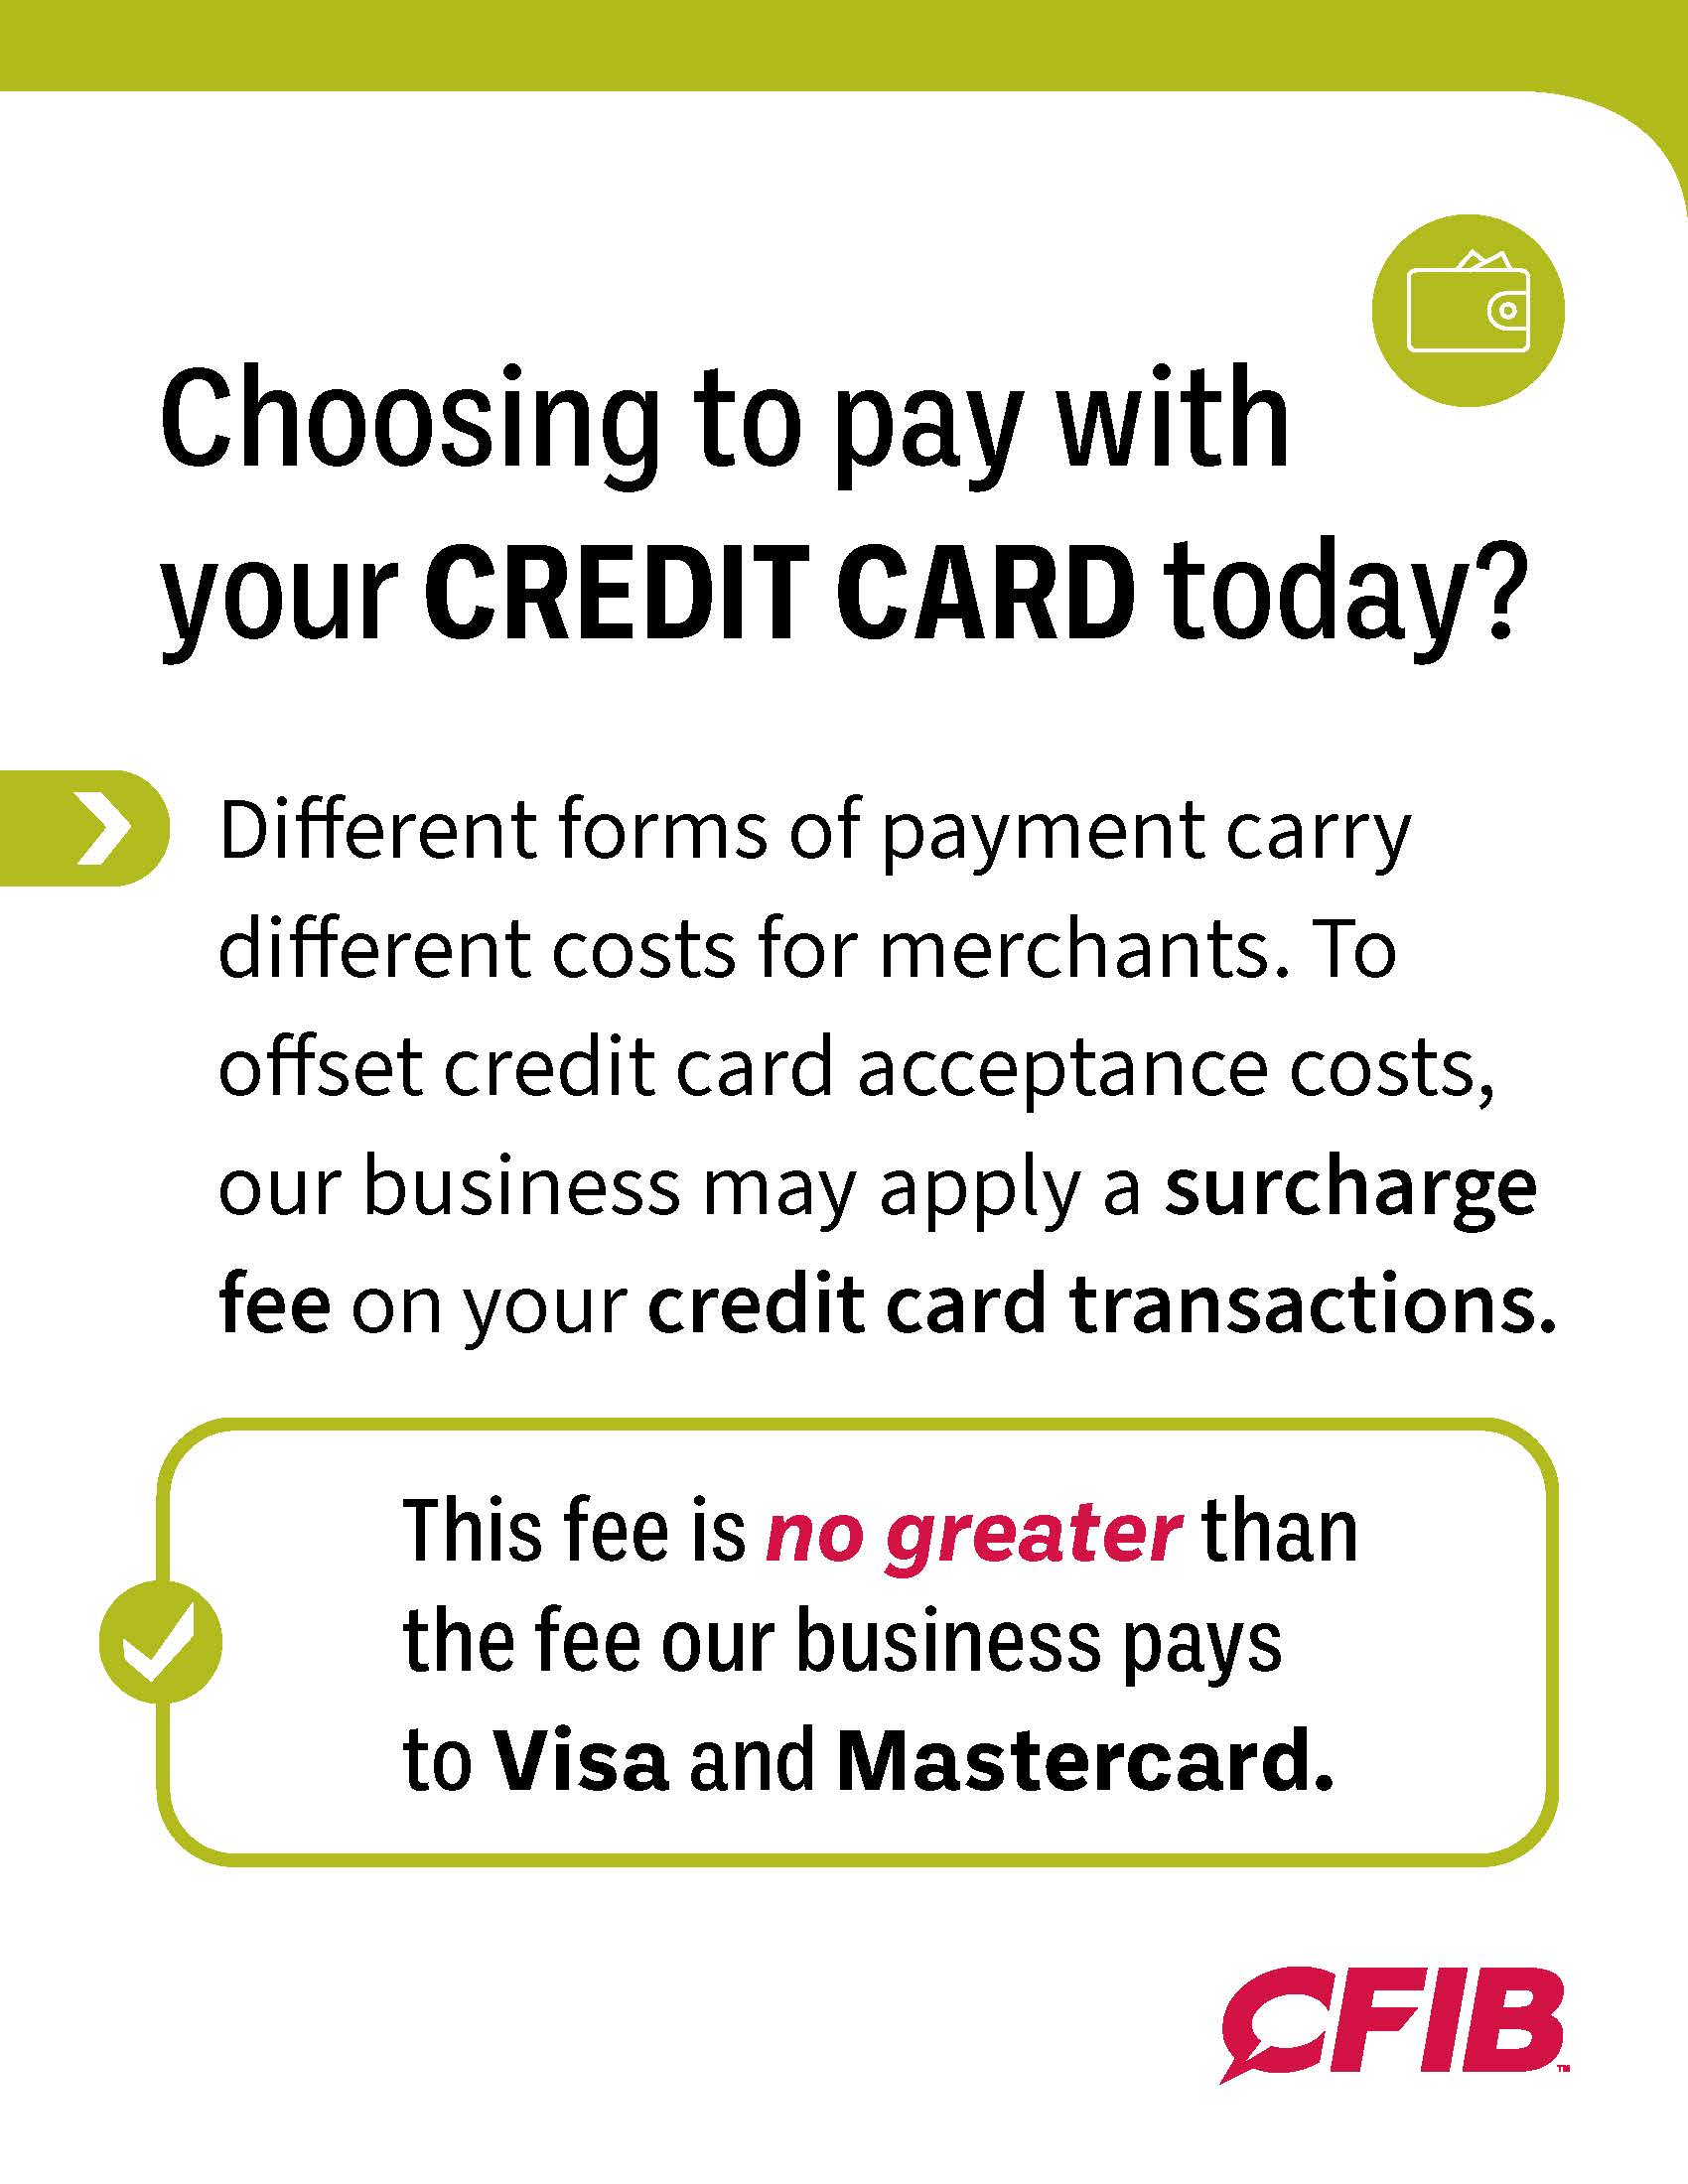 Citizens Credit Cards: Compare Our Offers and Apply Online